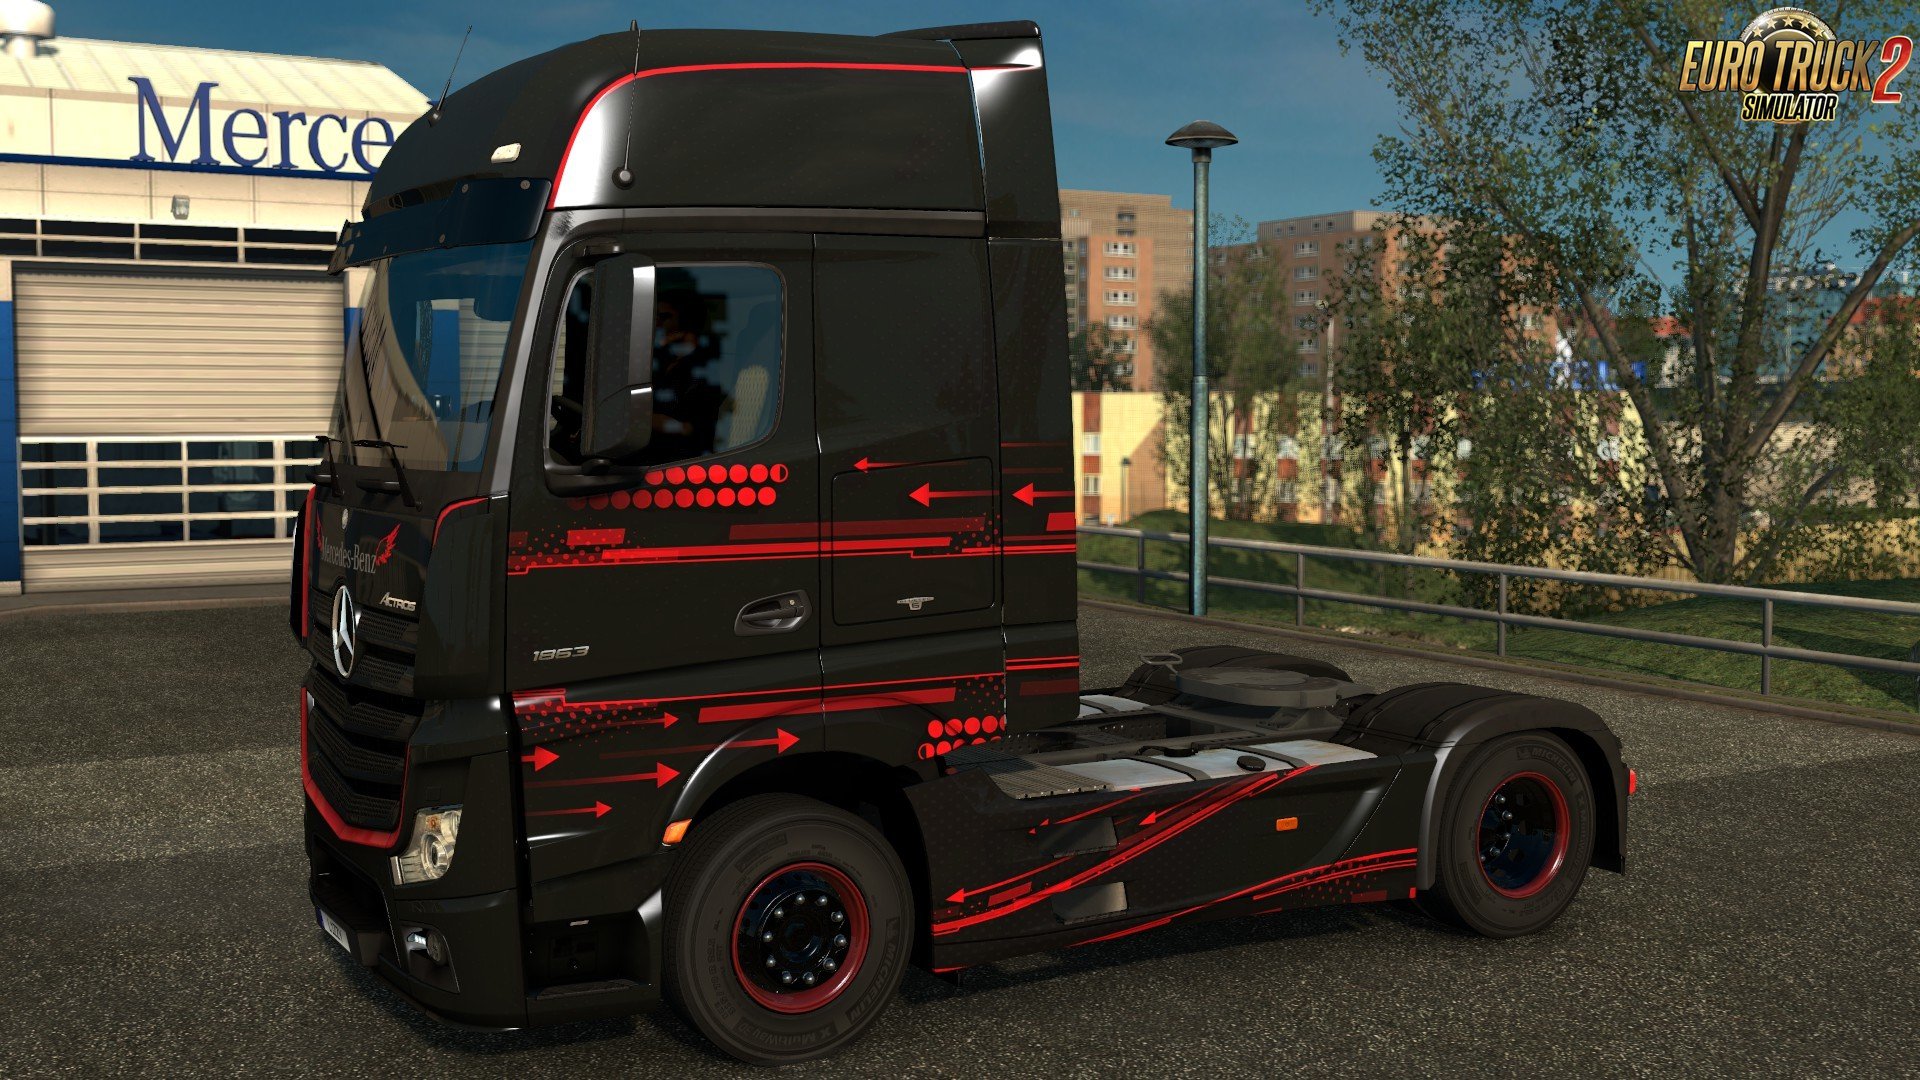 Mercedes Benz Actros 2014 - Accessio Paintjob by l1zzy